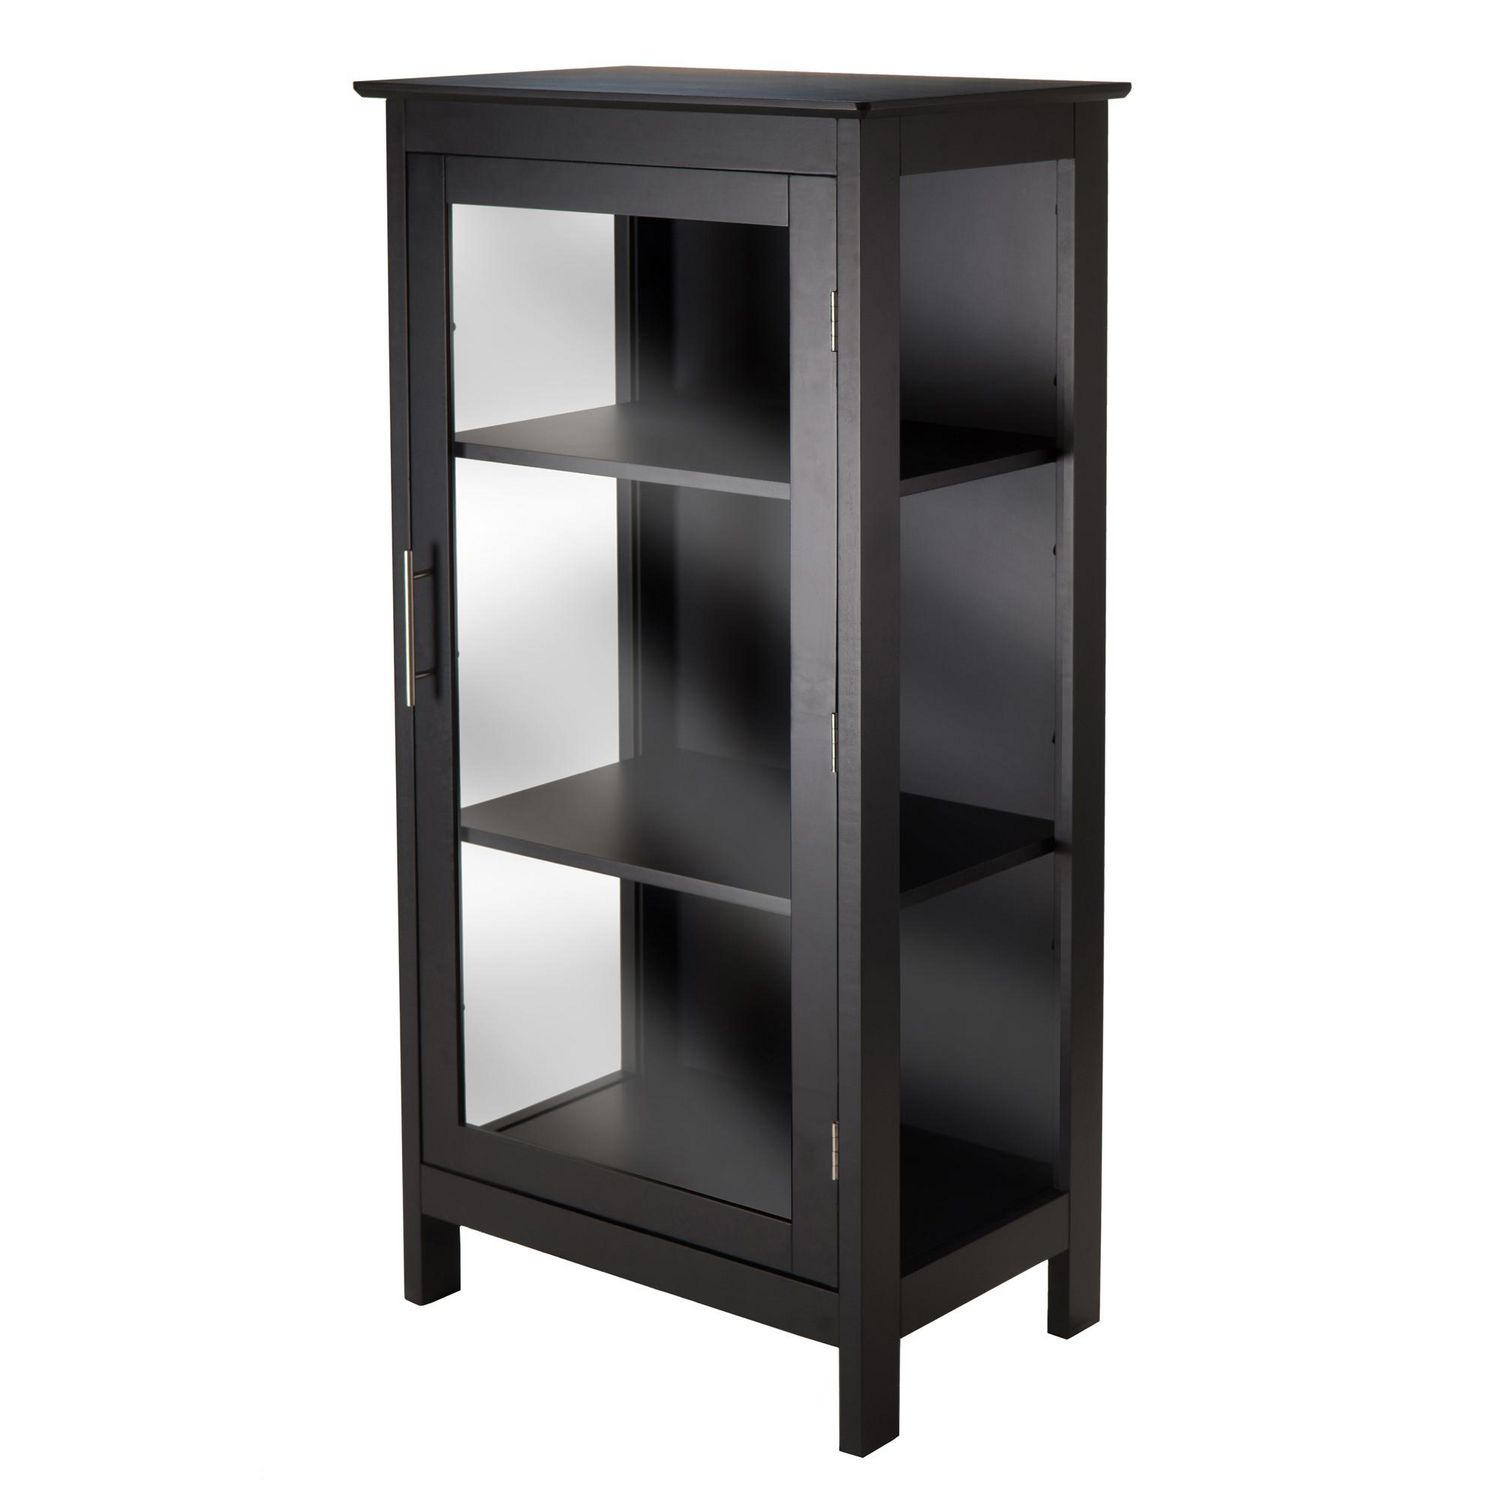 Winsome Poppy Display Cabinet With Glass Door In Black Finish